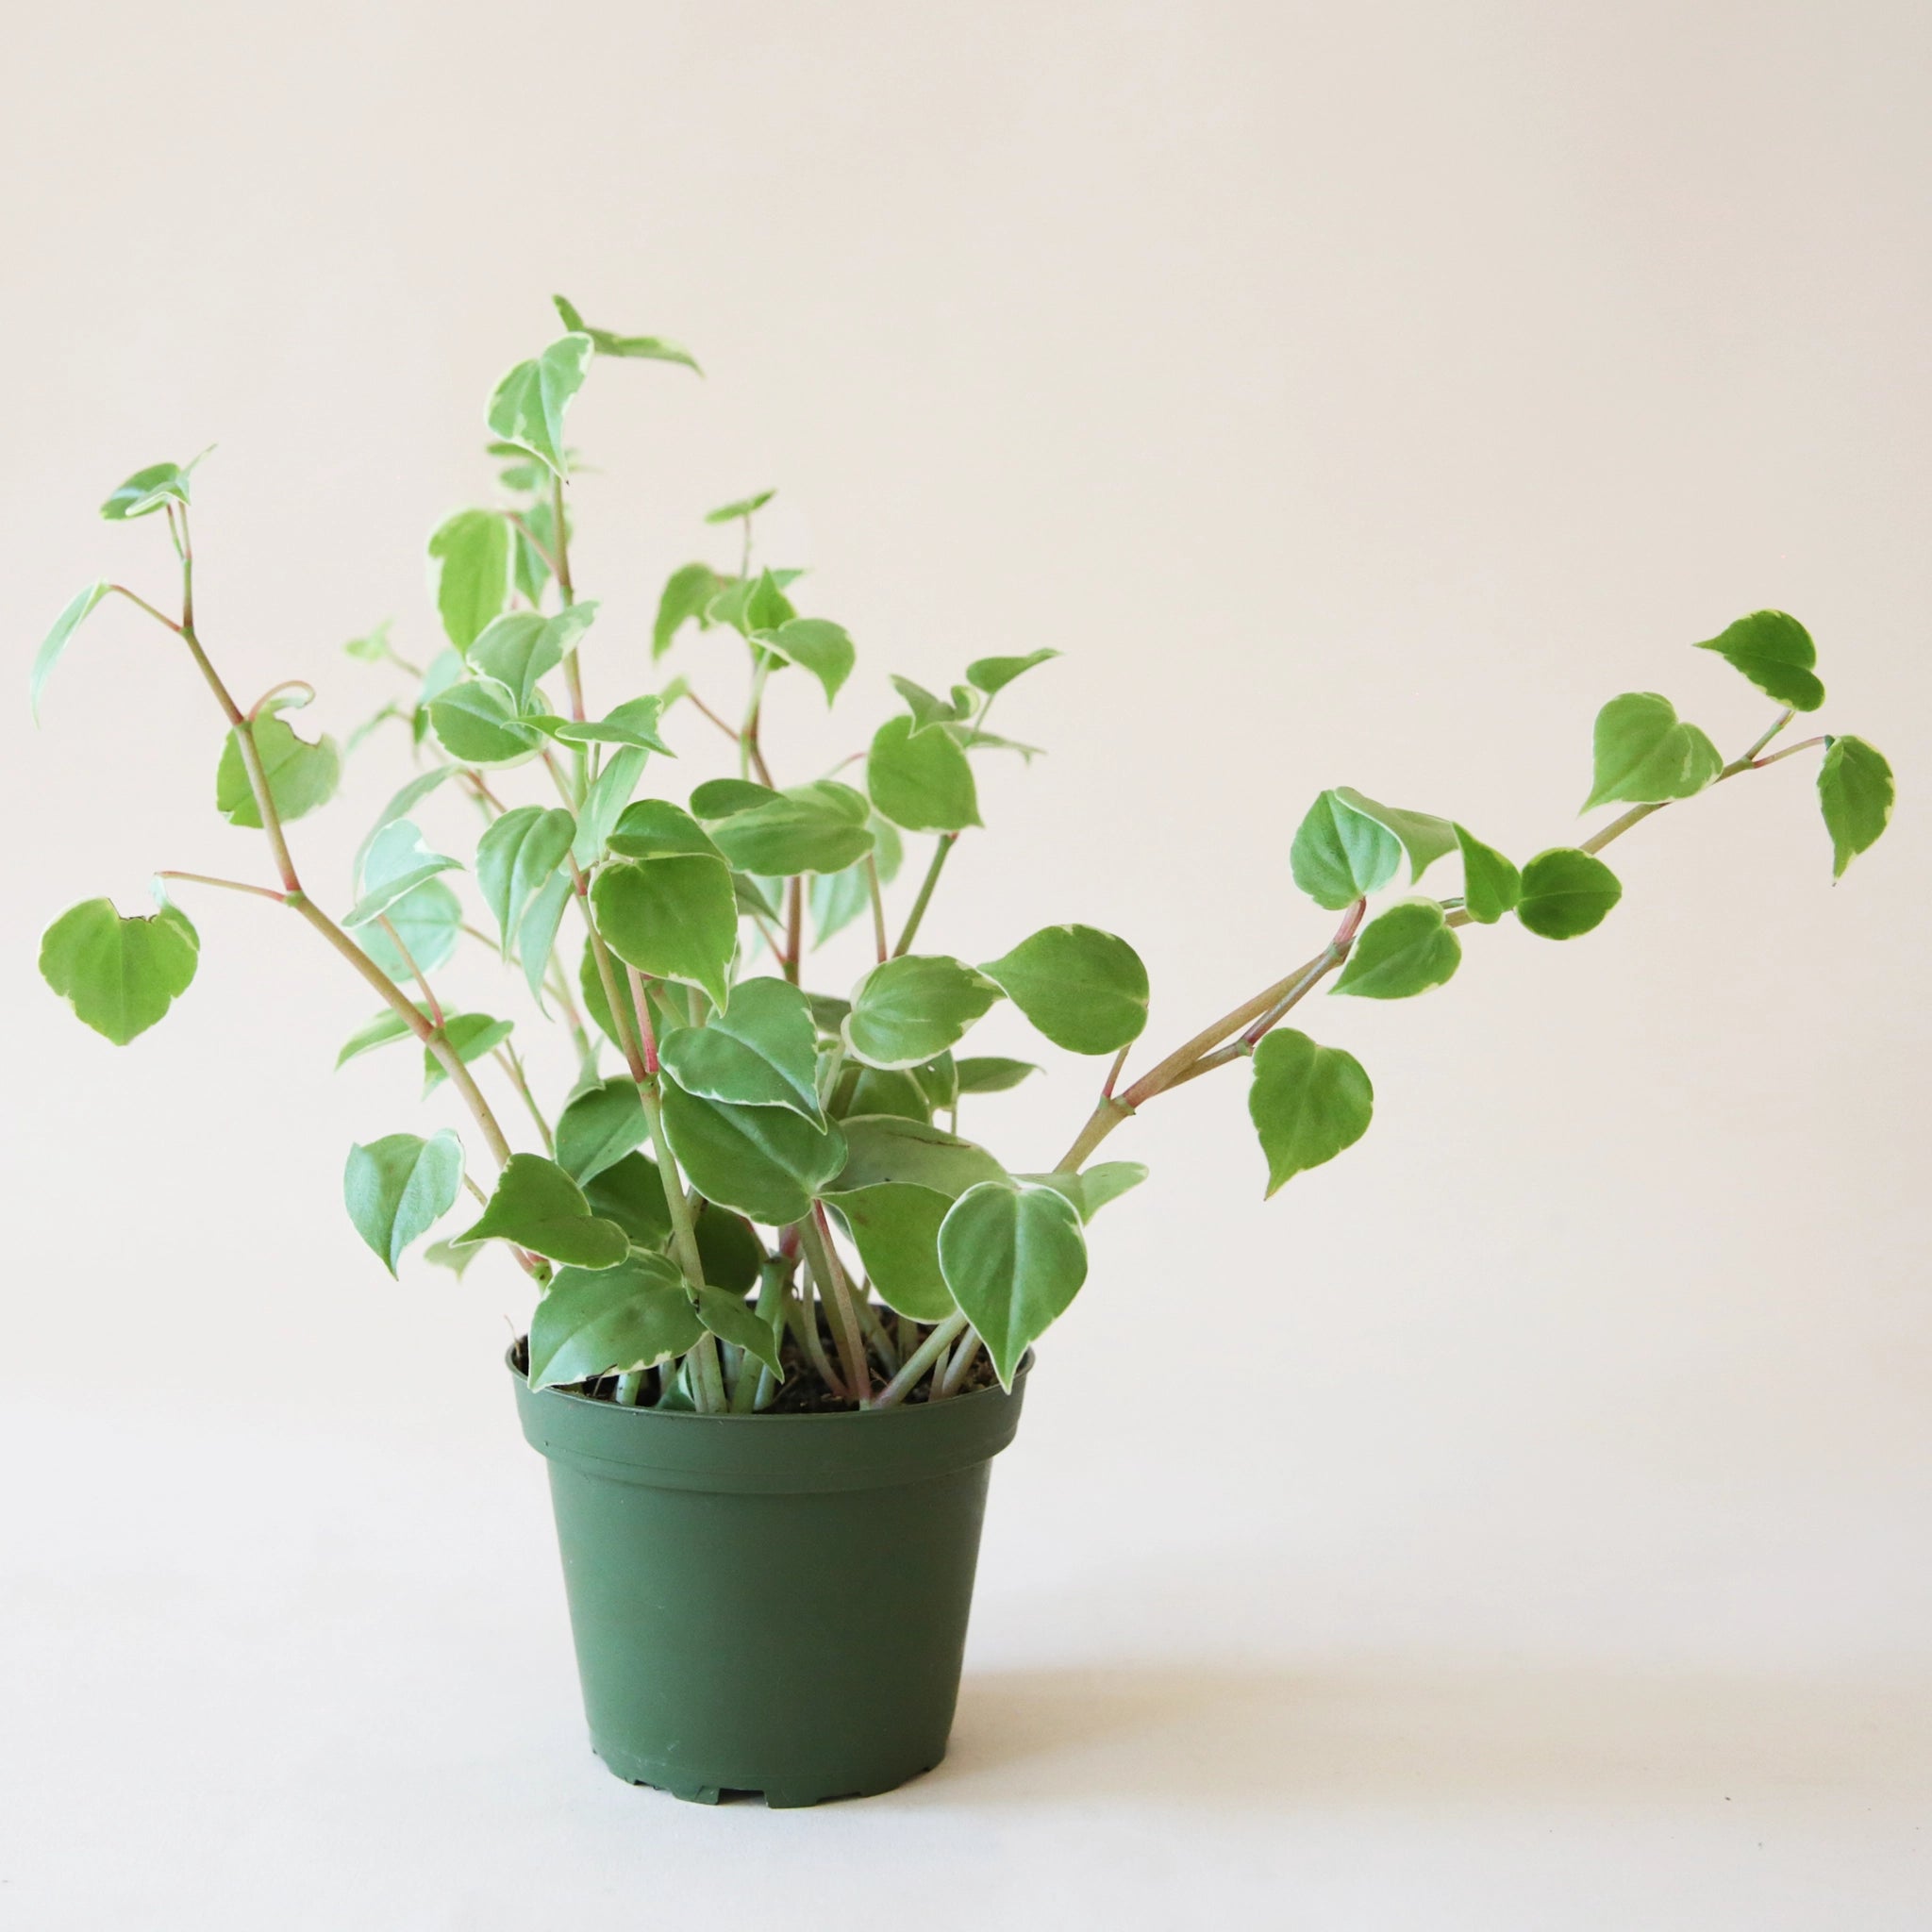 On a neutral background is a Peperomia Scadens. The plant has long limbs and small green leaves with a slightly lighter cream edge.